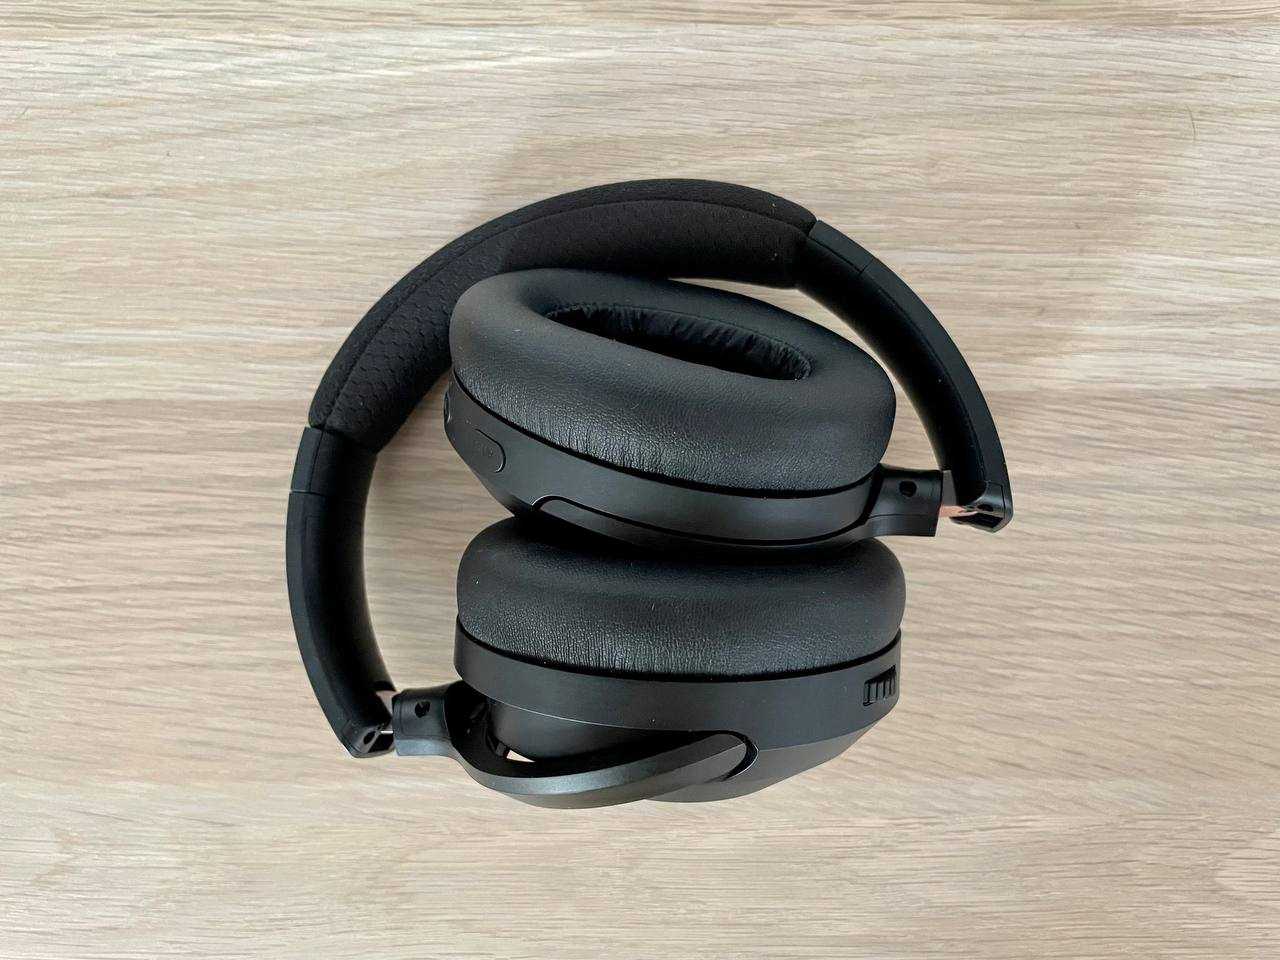 Creative Zen Hybrid Pro review: excellent over-ears with ANC